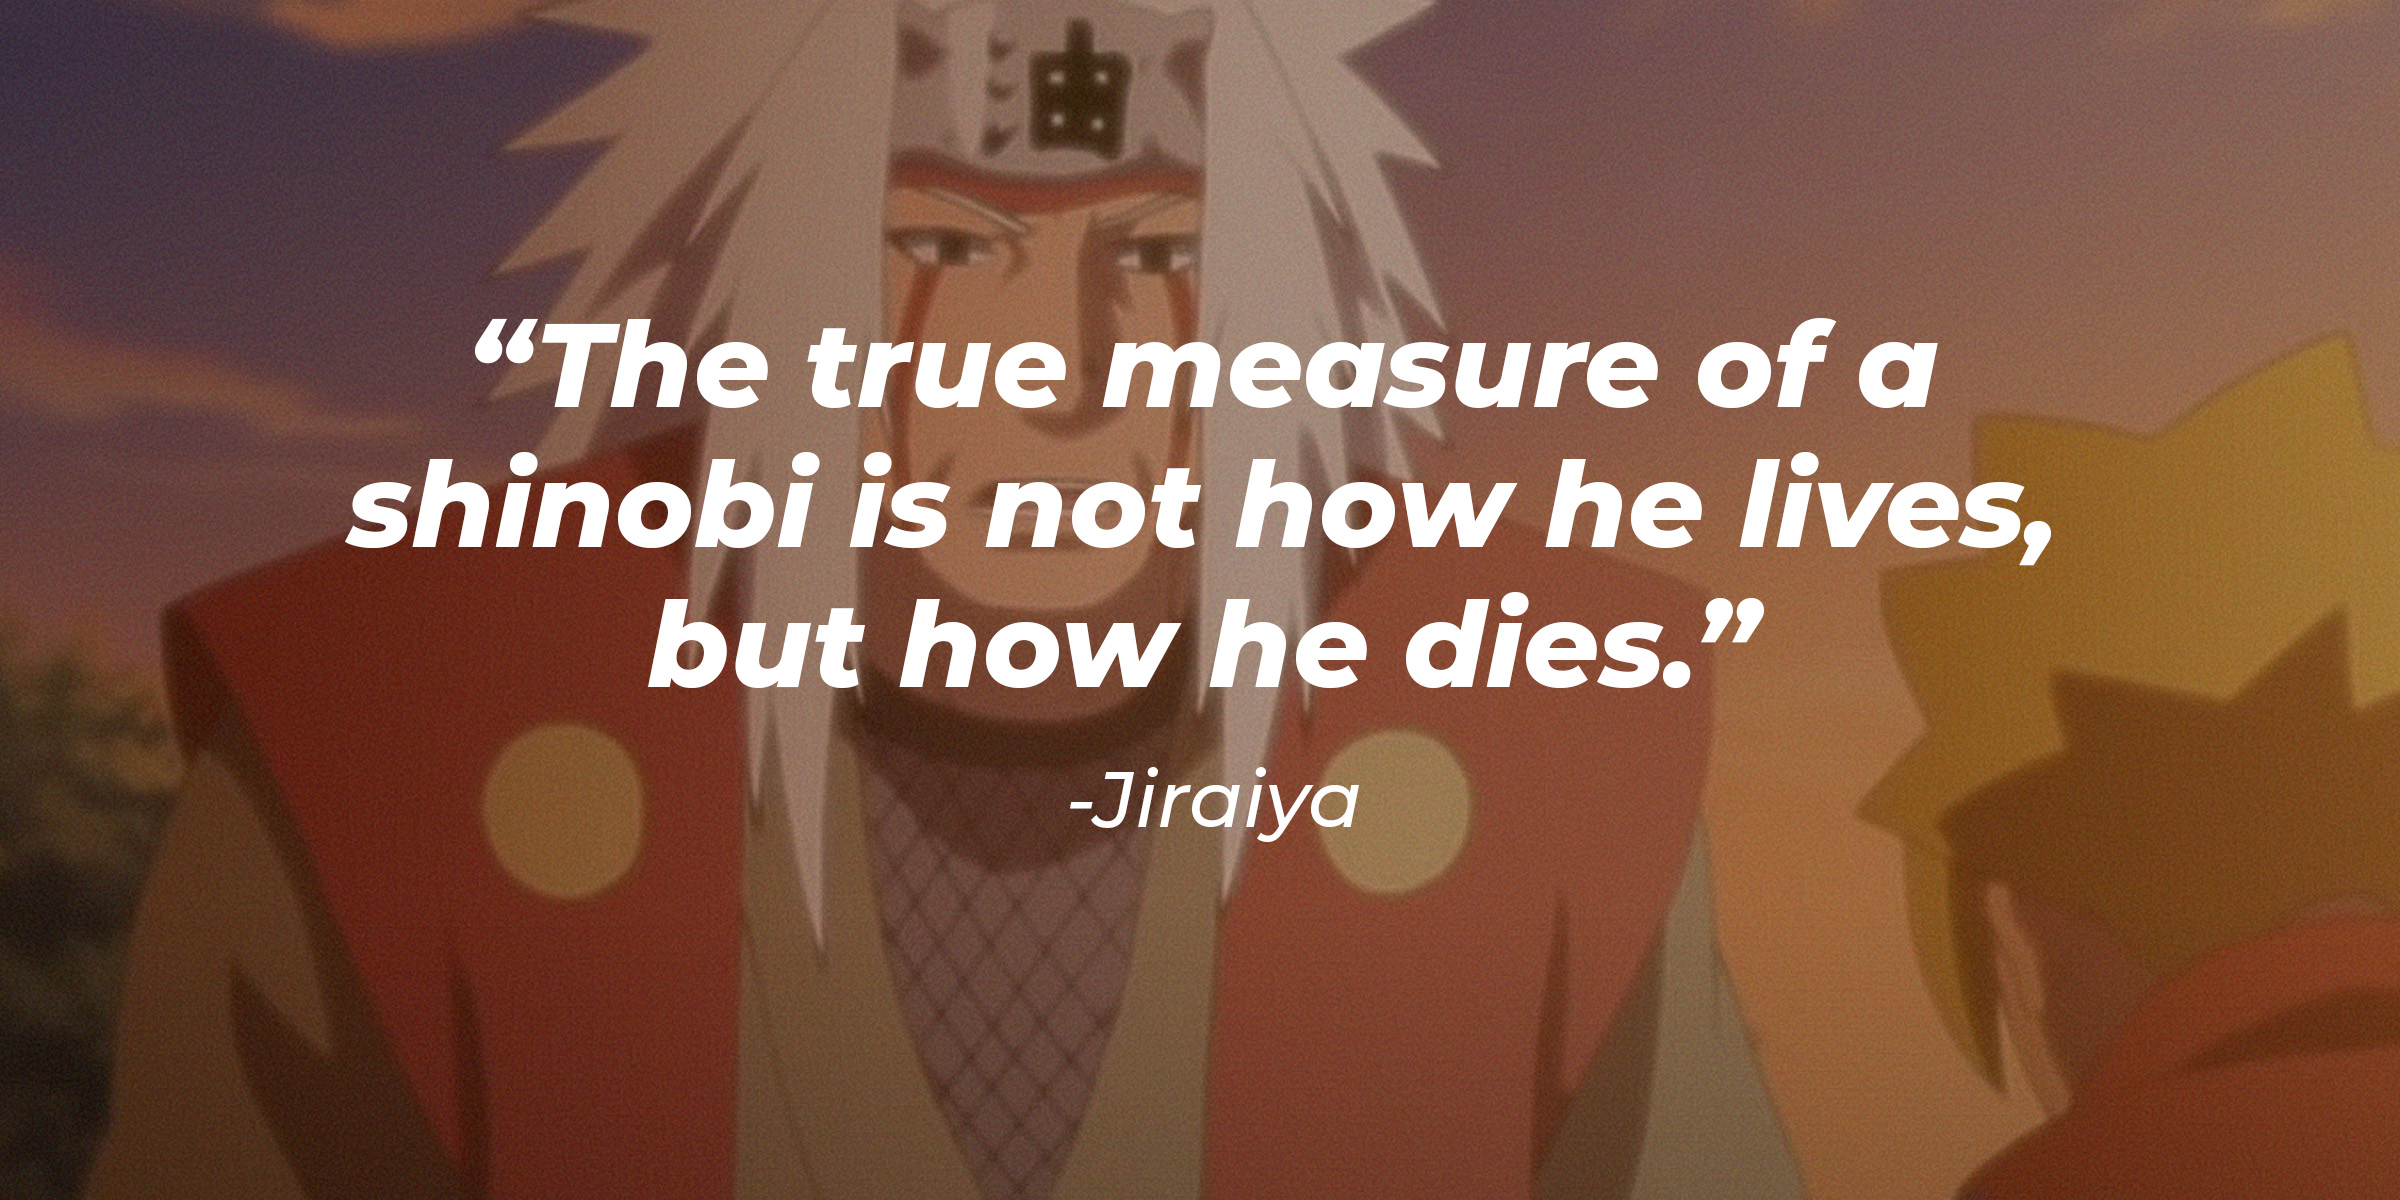 Jiraiya, with his quote: “The true measure of a shinobi is not how he lives, but how he dies.” │ Source: youtube.com/CrunchyrollCollection